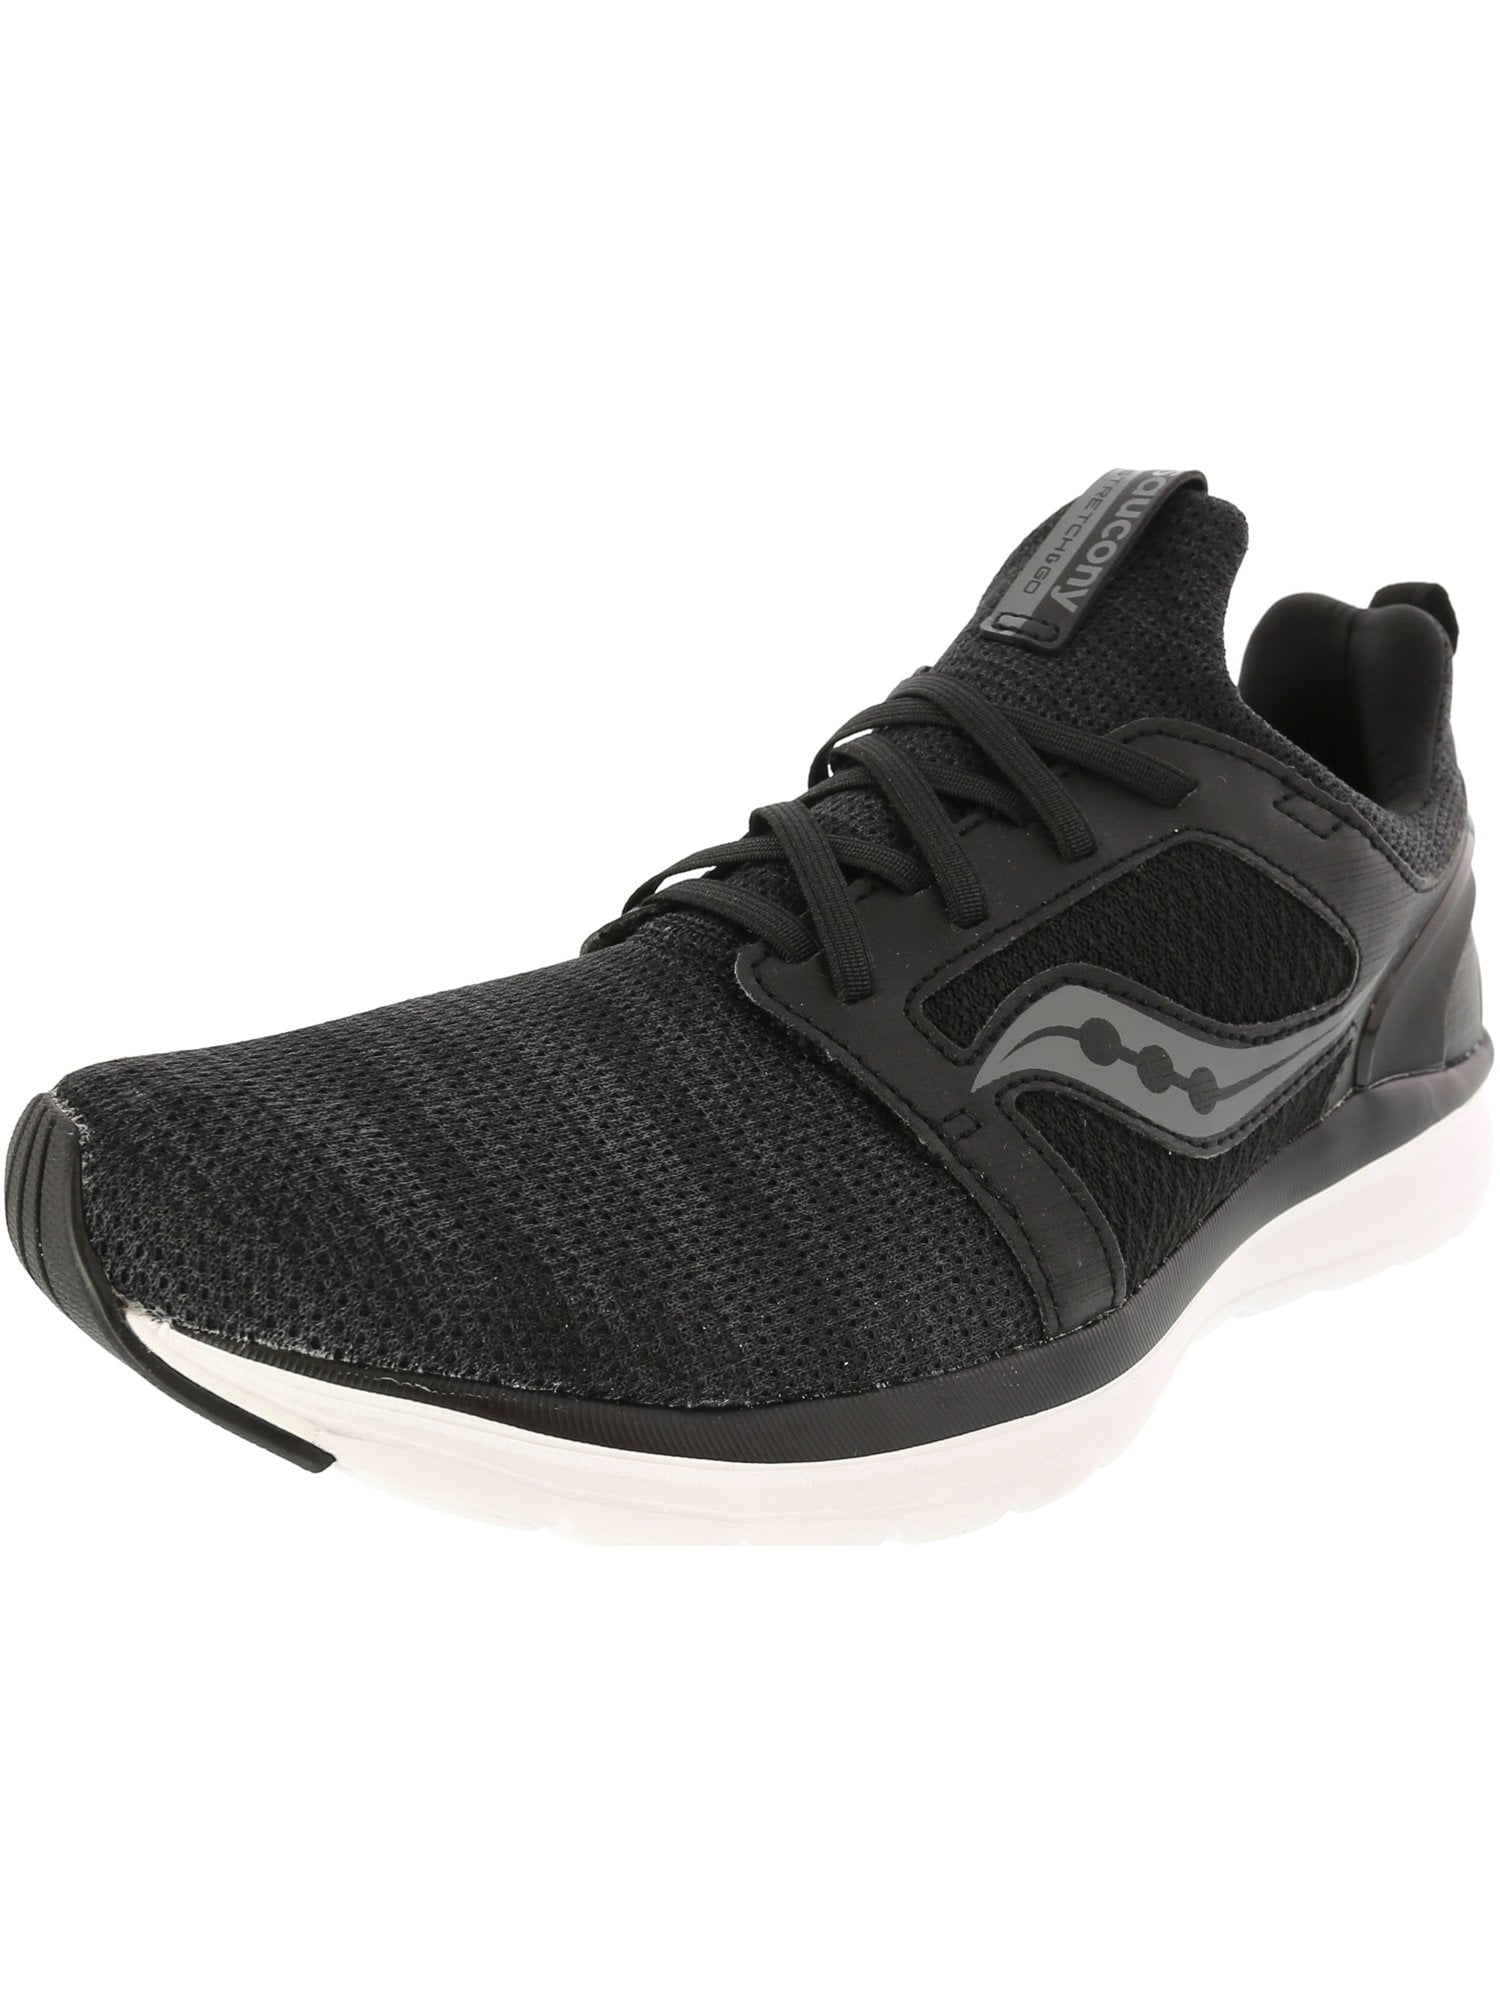 Saucony Men's Stretch And Go Ease 